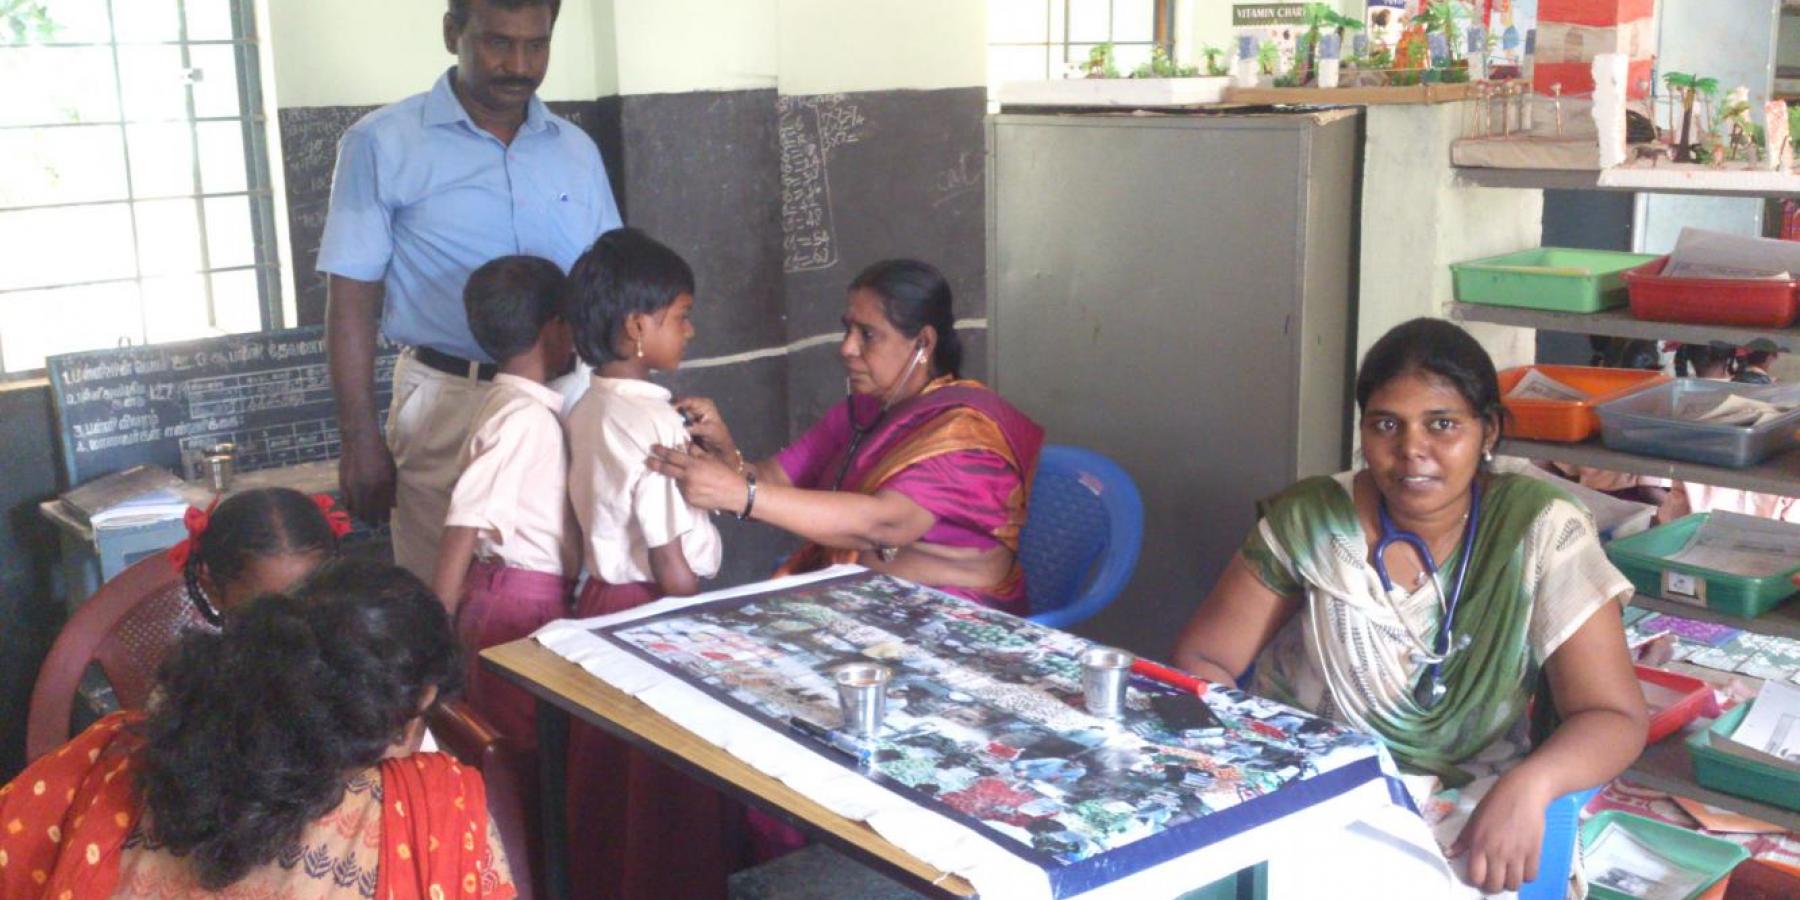 Physicians conduct regular health check up at Chettinad Hospital Research Institute in Chennai, India.